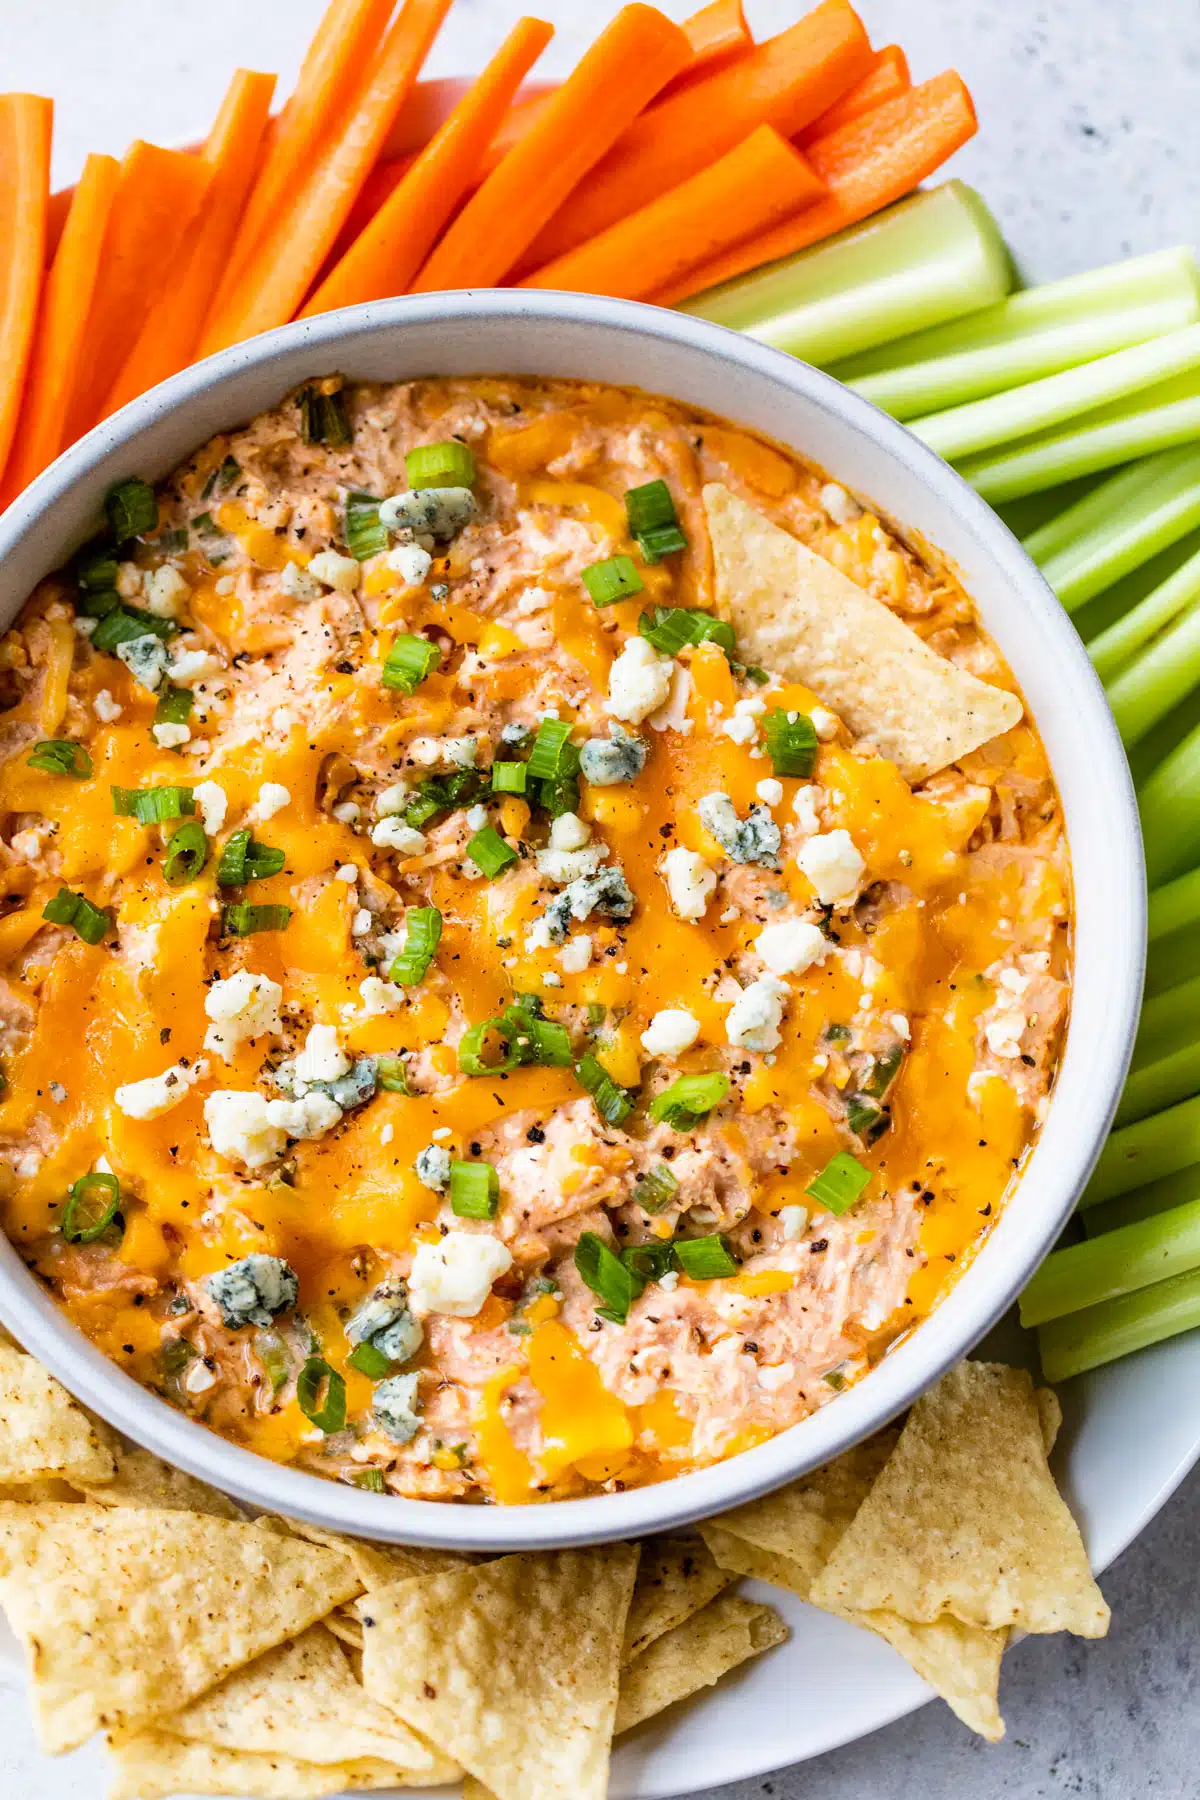 a bowl of chicken dip surrounded by tortilla chips, celery and carrots